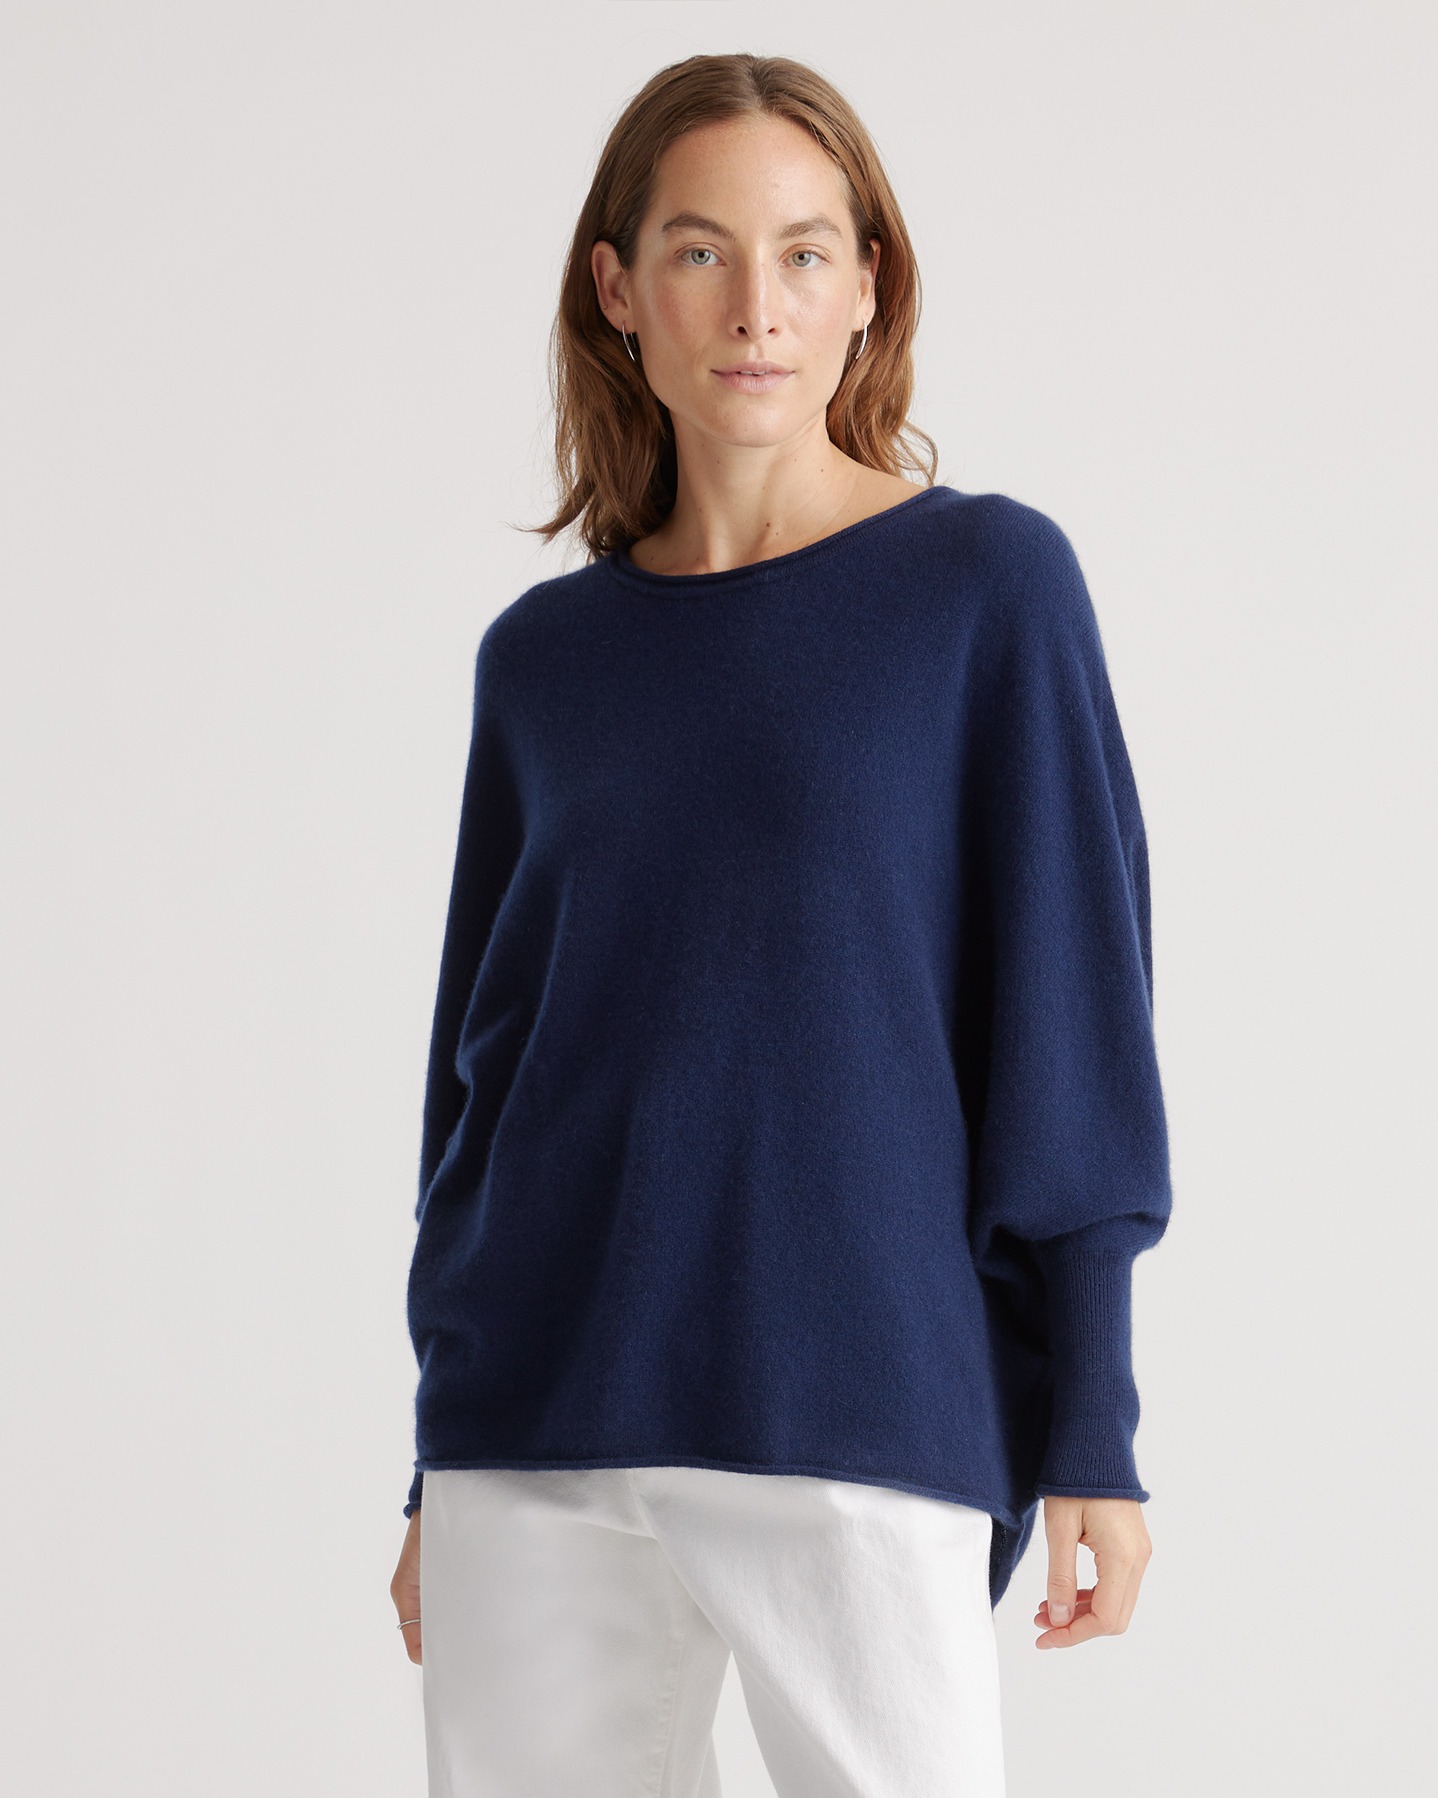 Women's Cashmere Ribbed 3/4 Sleeve Crew Neck